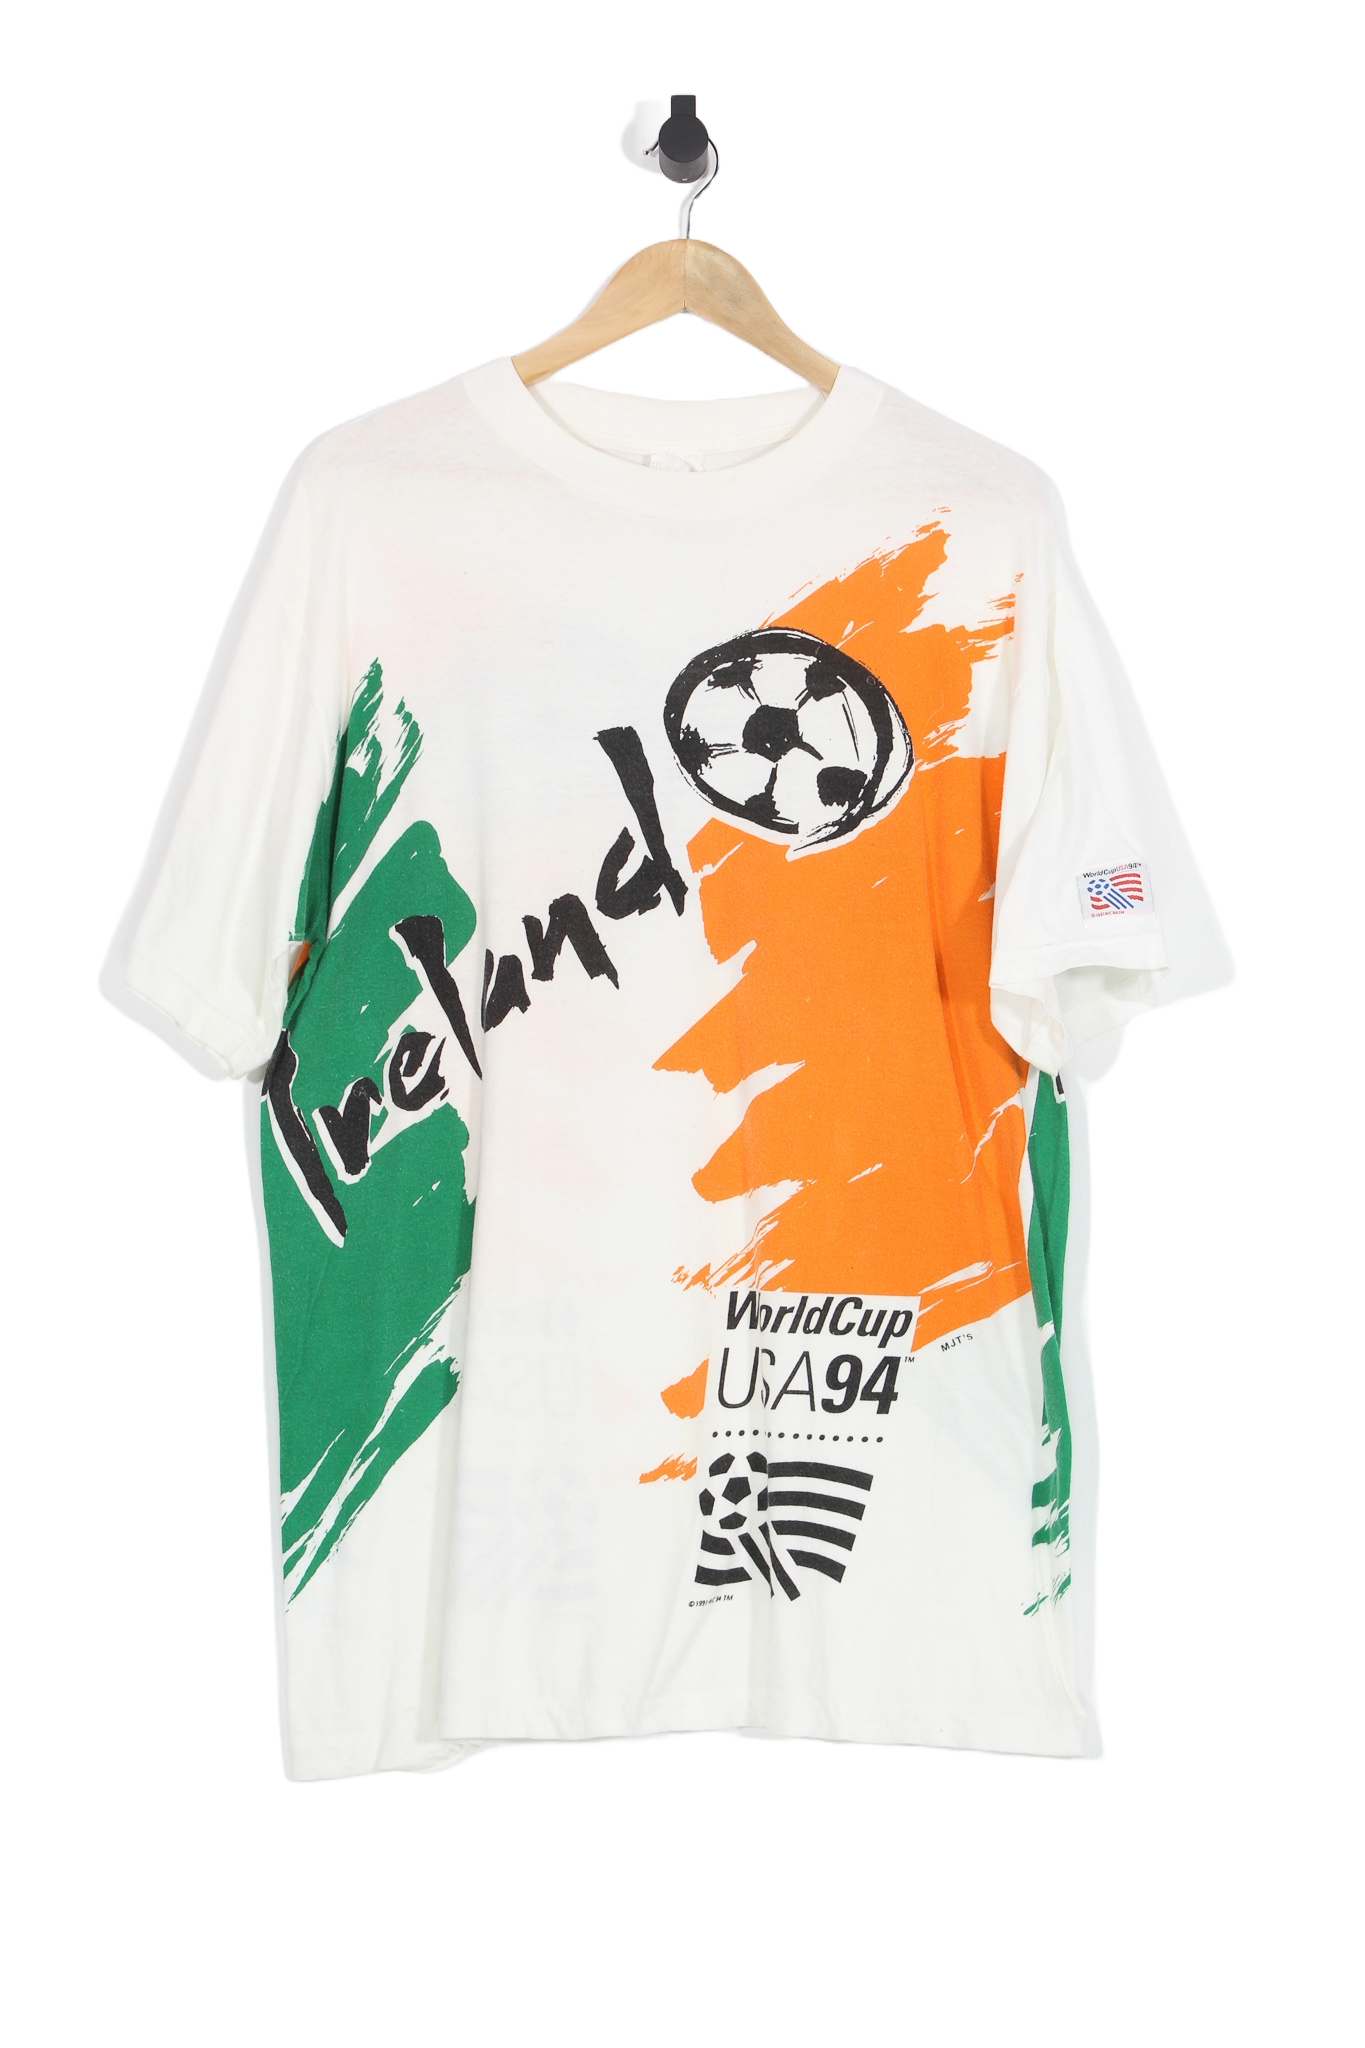 Vintage 1994 Ireland World Cup All Over Print T-Shirt - L